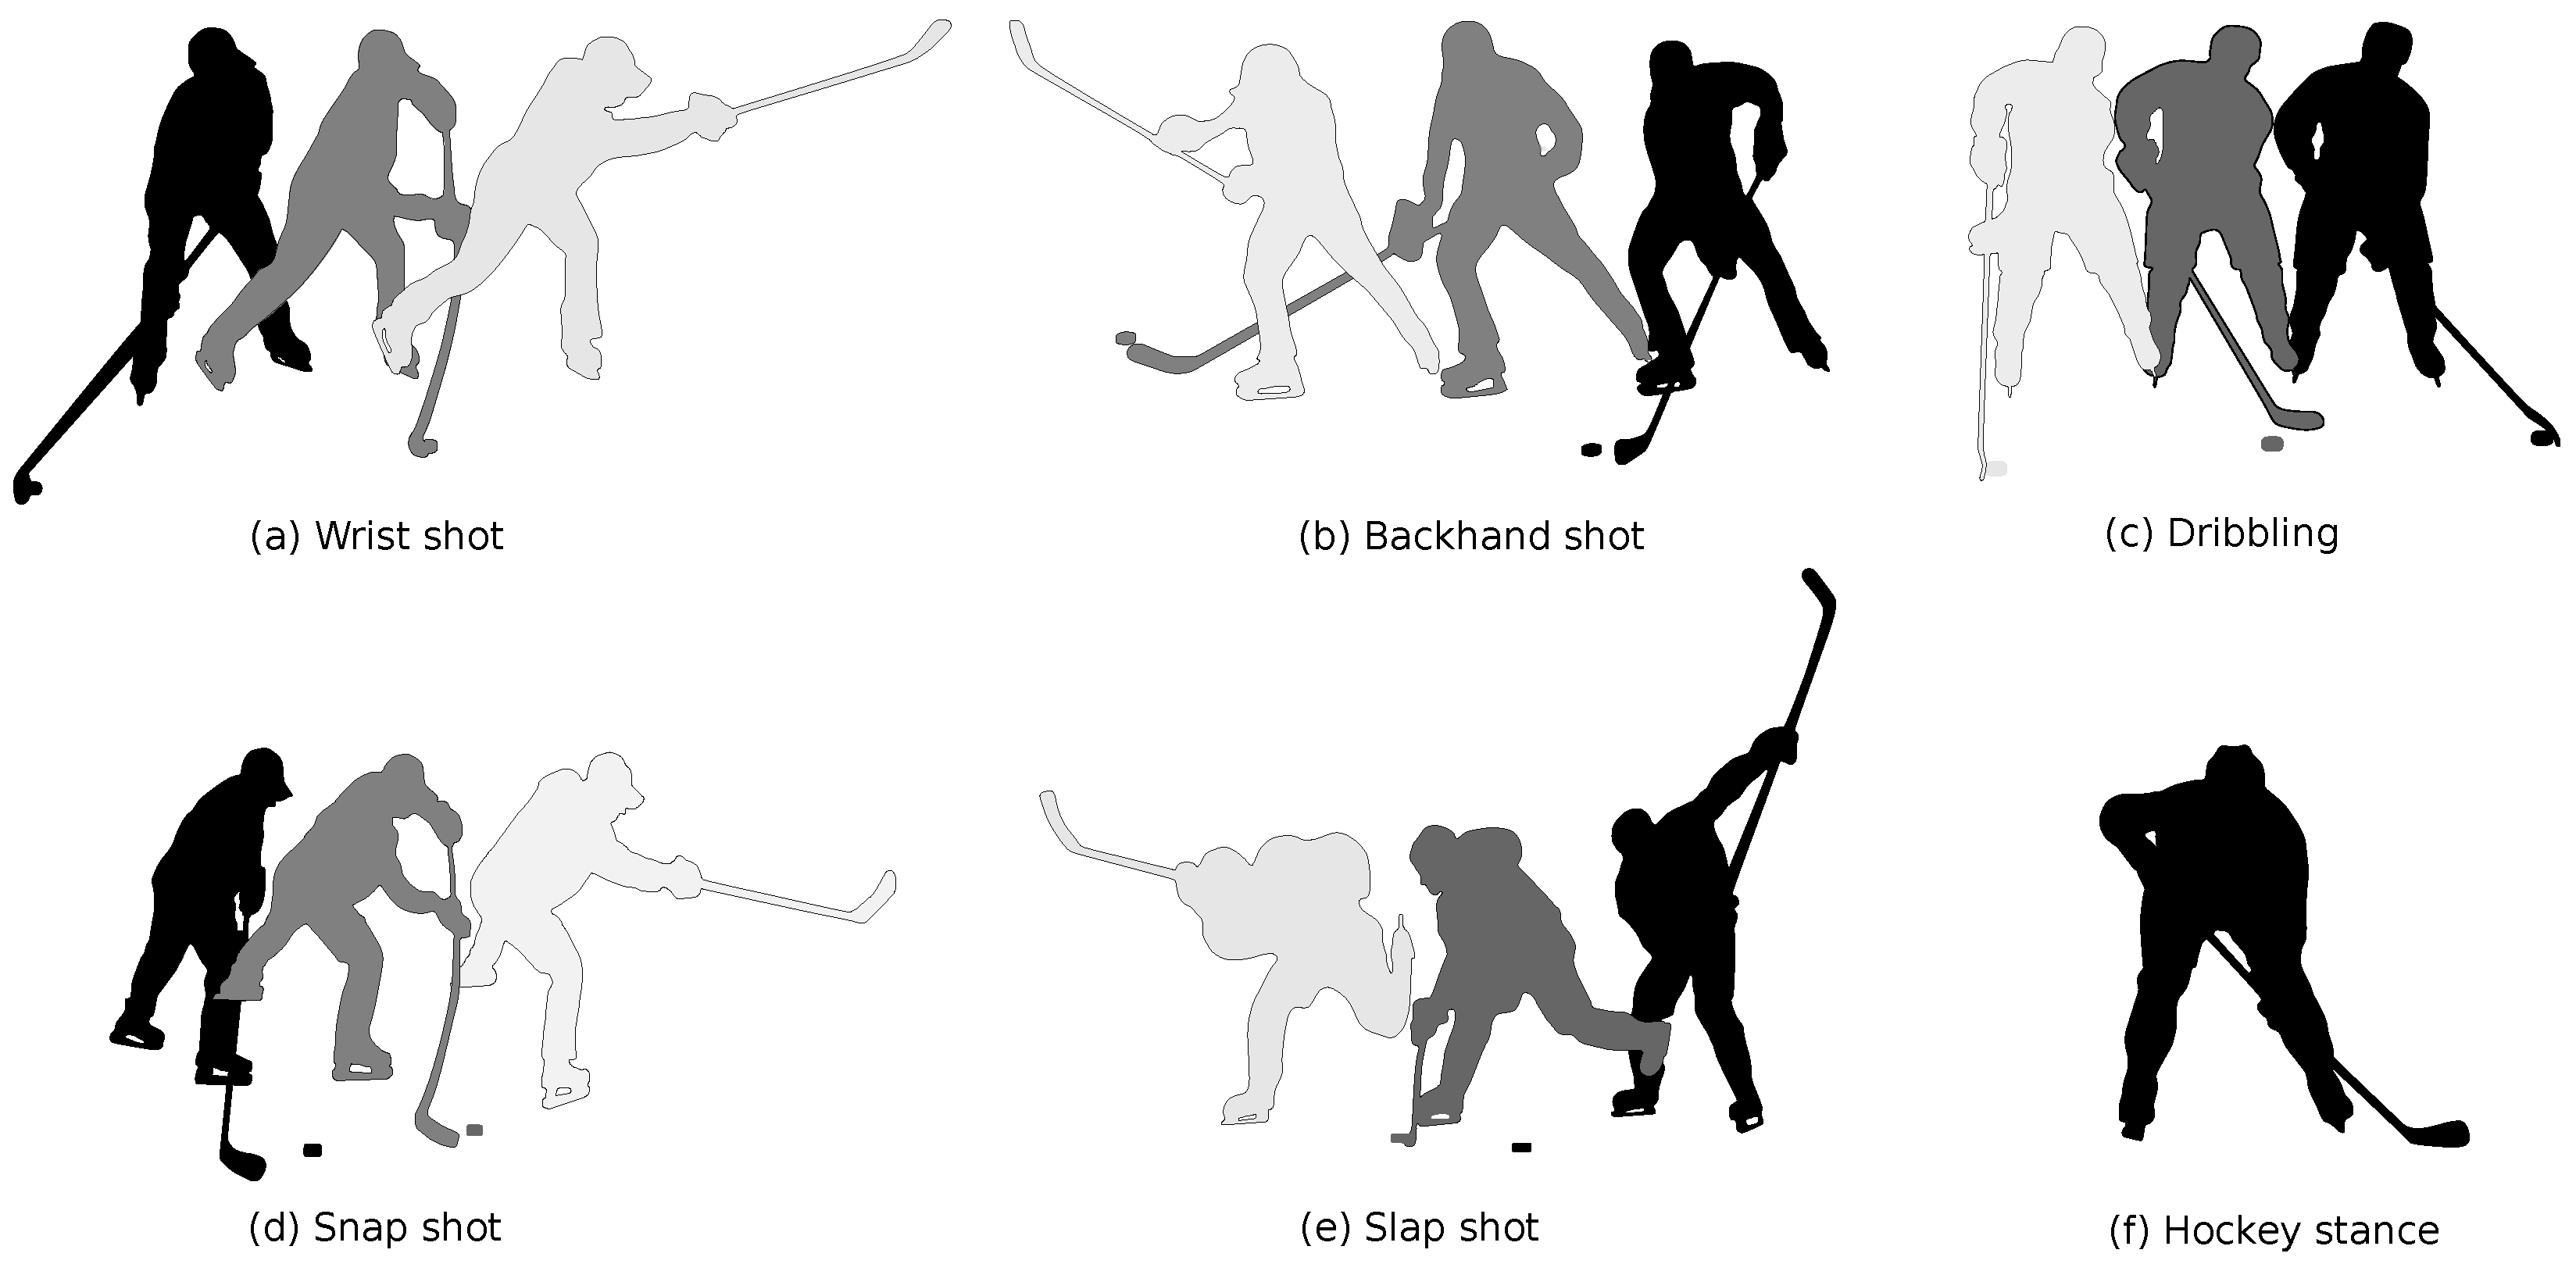 NHL scores with GB Labs